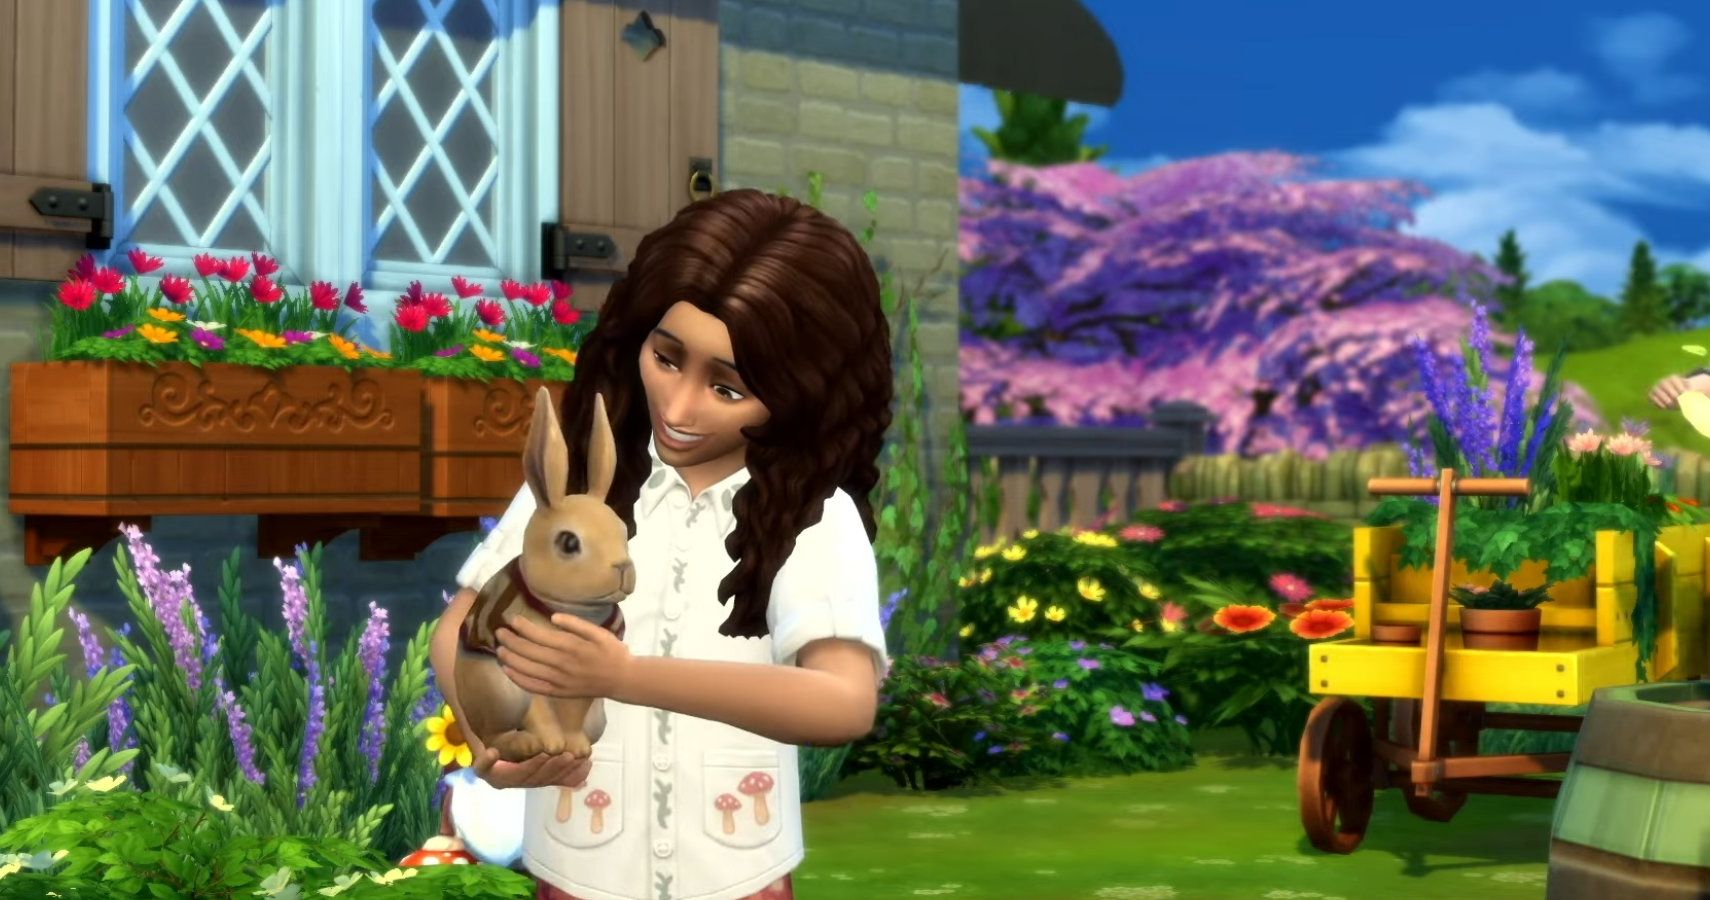 Sims child with a bunny